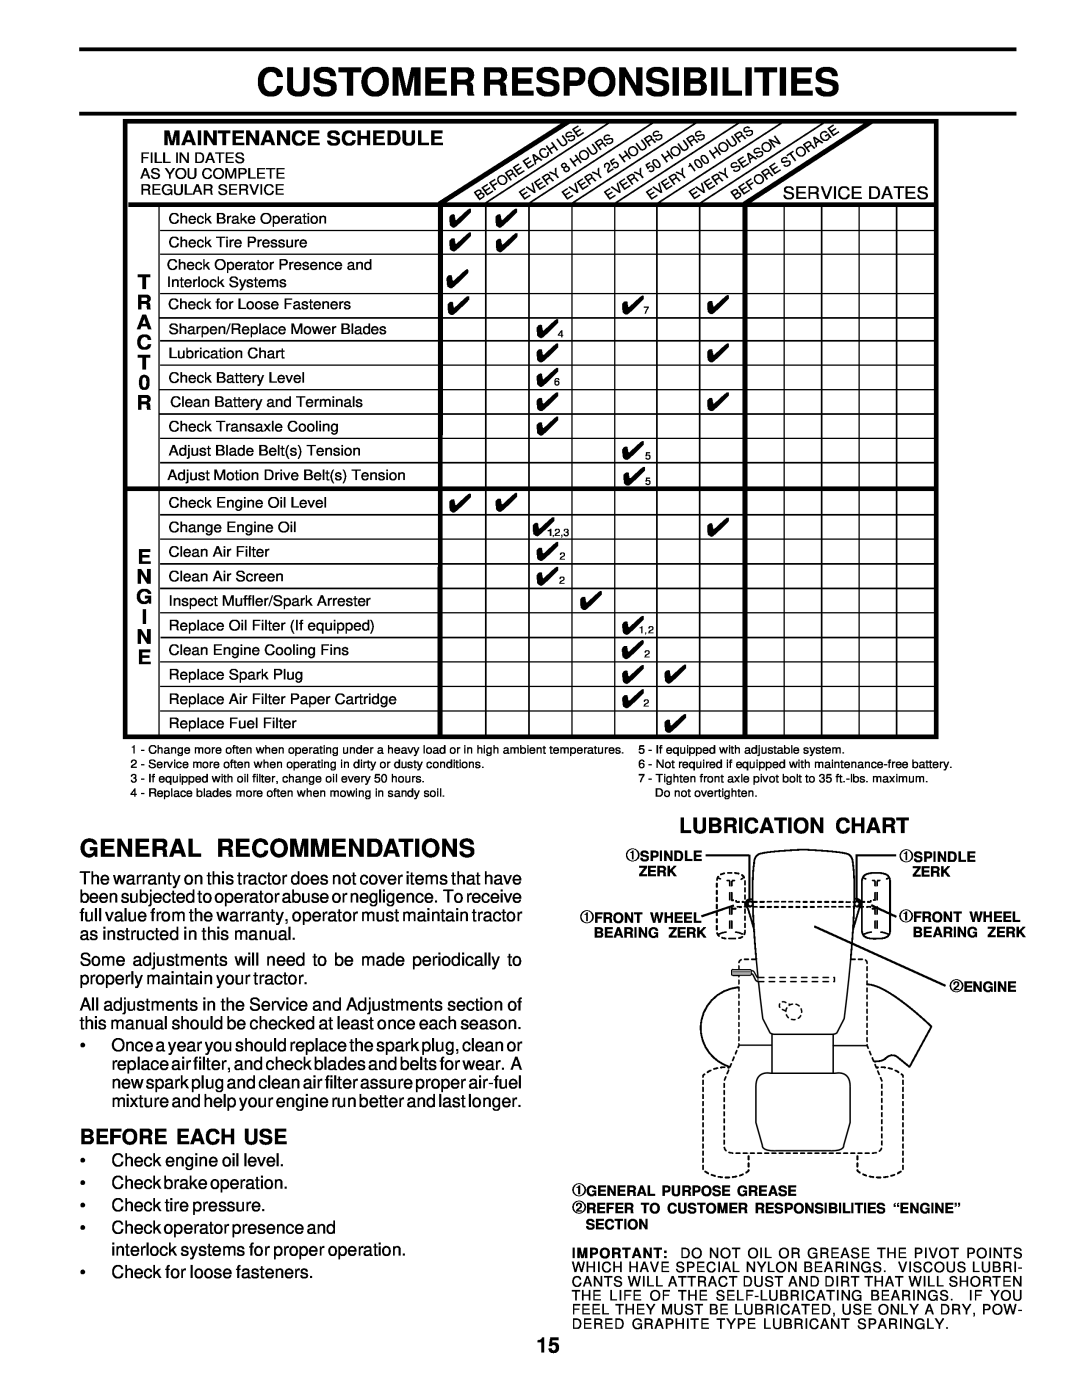 Poulan 177552 Customer Responsibilities, General Recommendations, Before Each Use, Lubrication Chart, Maintenance Schedule 